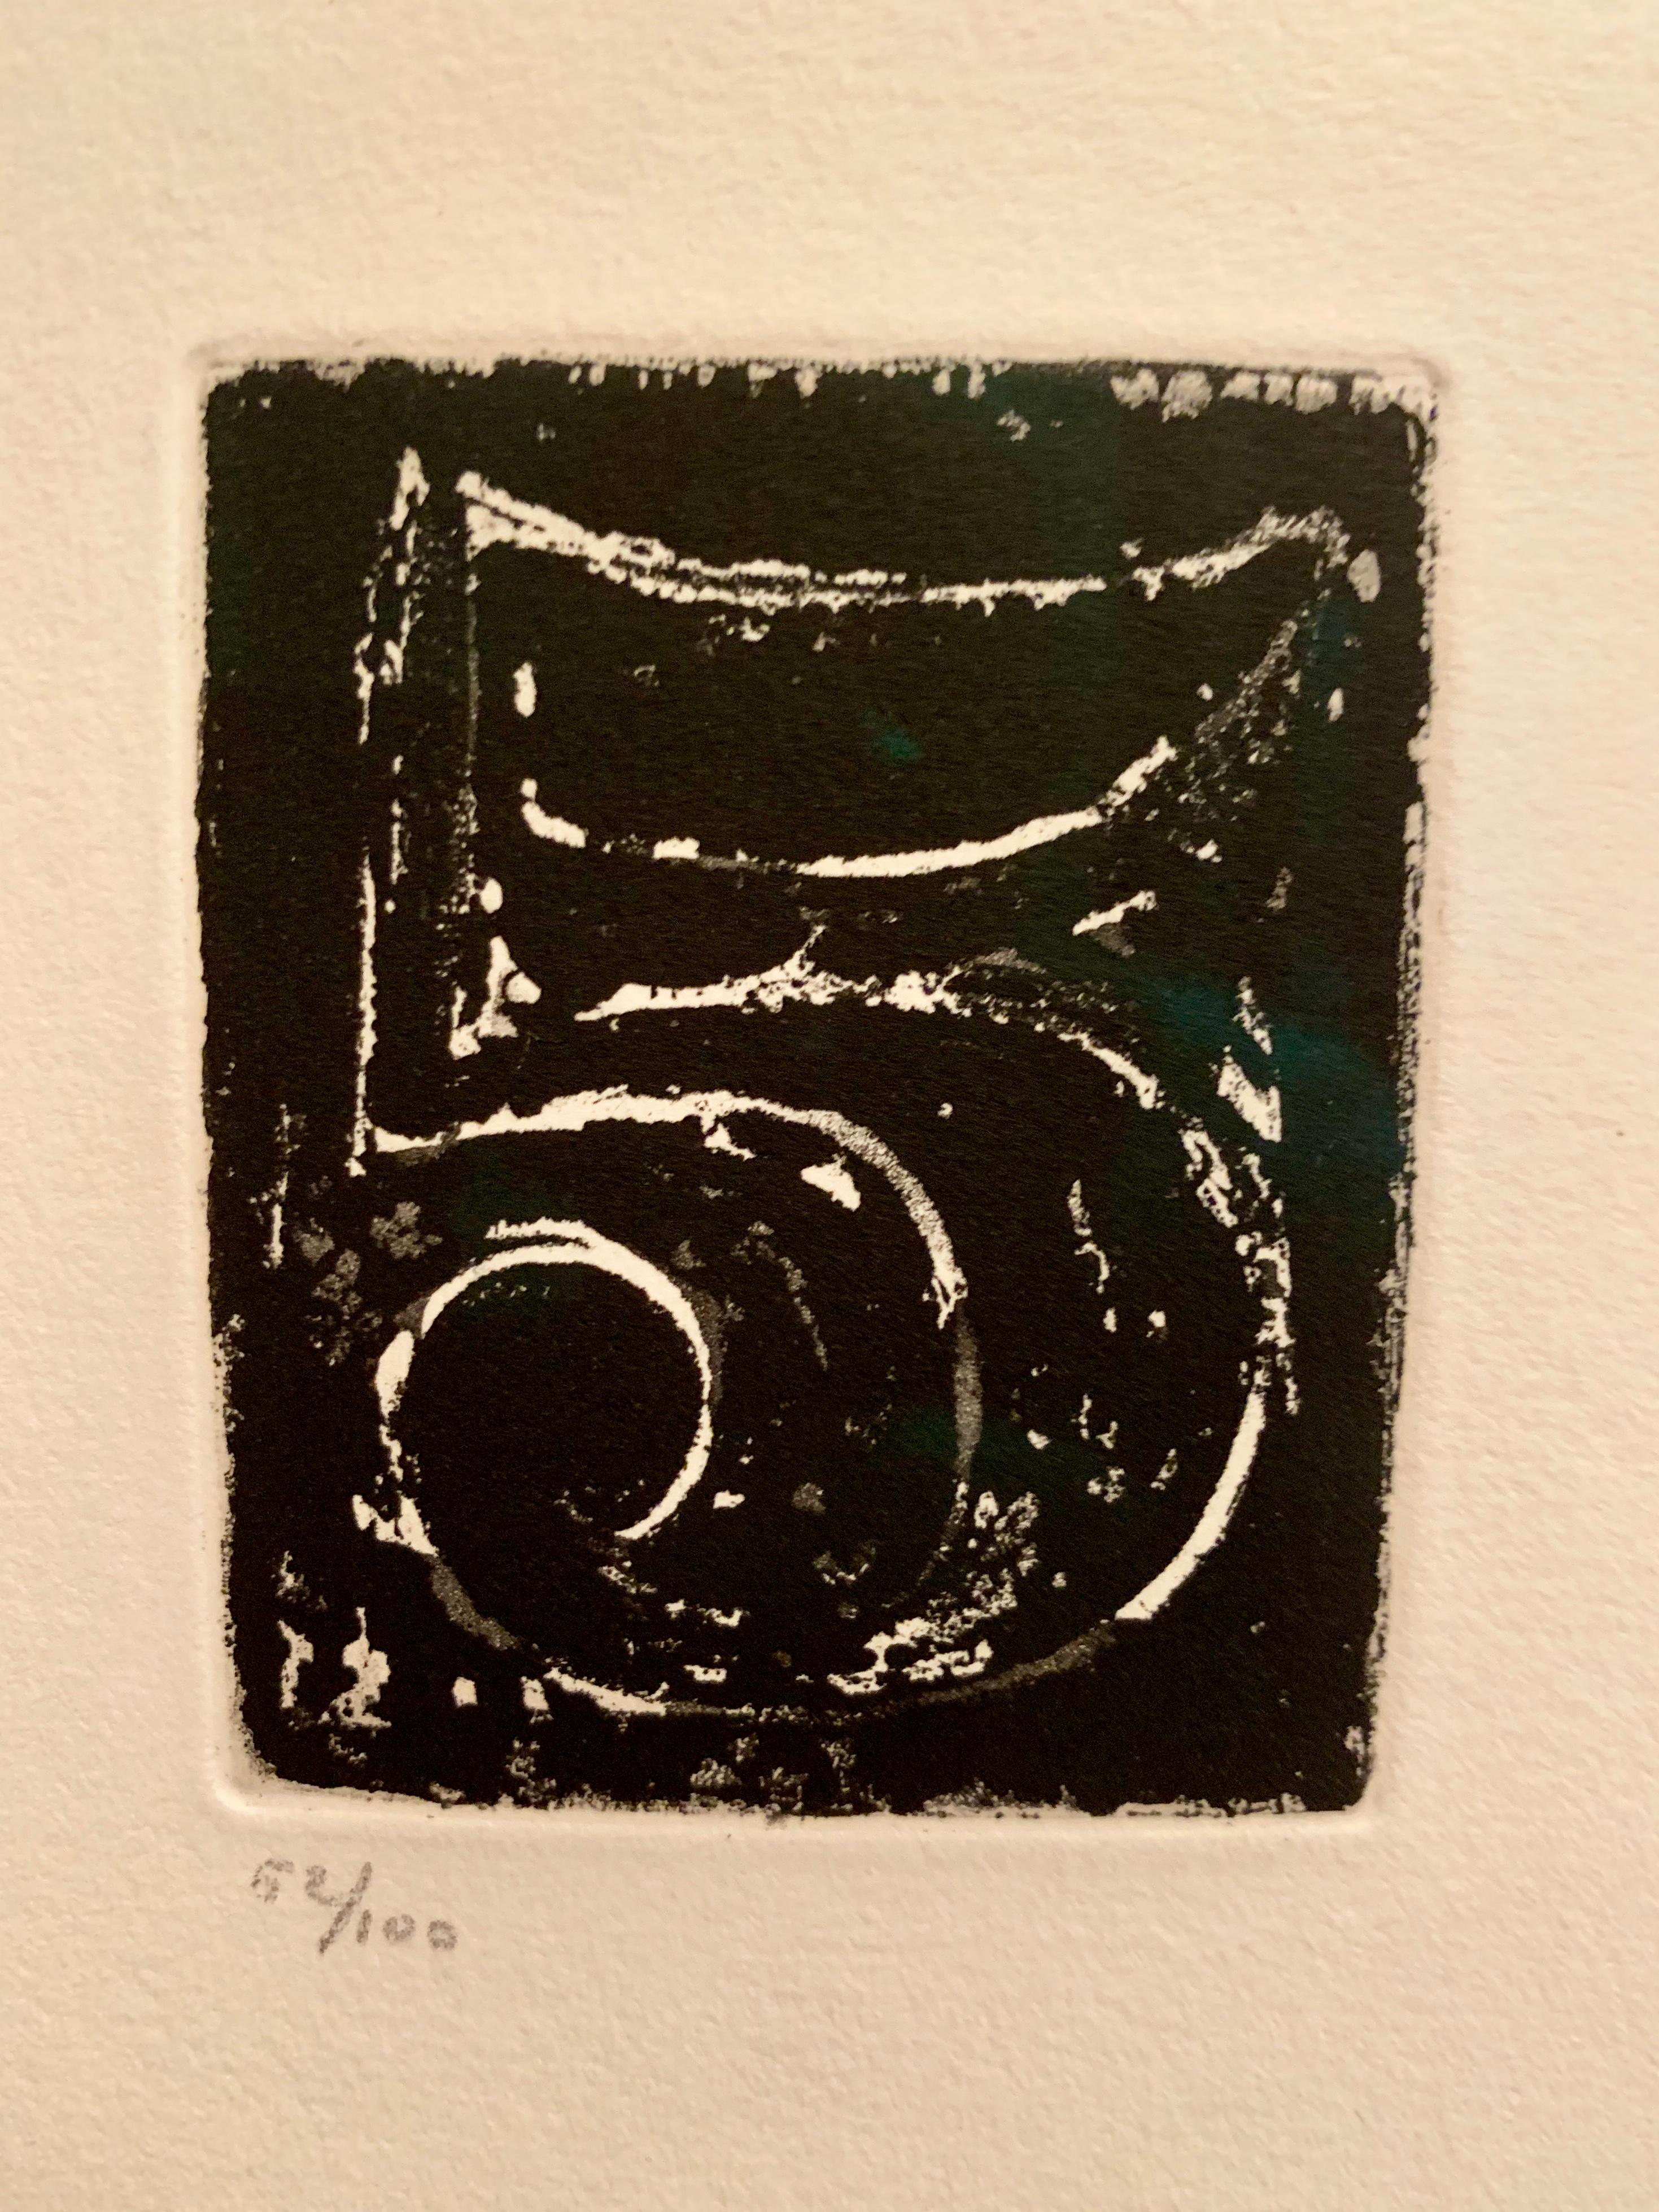 Jasper Johns
No. 5 ( ULAE)
Etching and aquatint, 1975 signed and dated in pencil number 52/100
Play: 2 1/4“ x 2 1/4“
Paper size 8 3/8” by 6 